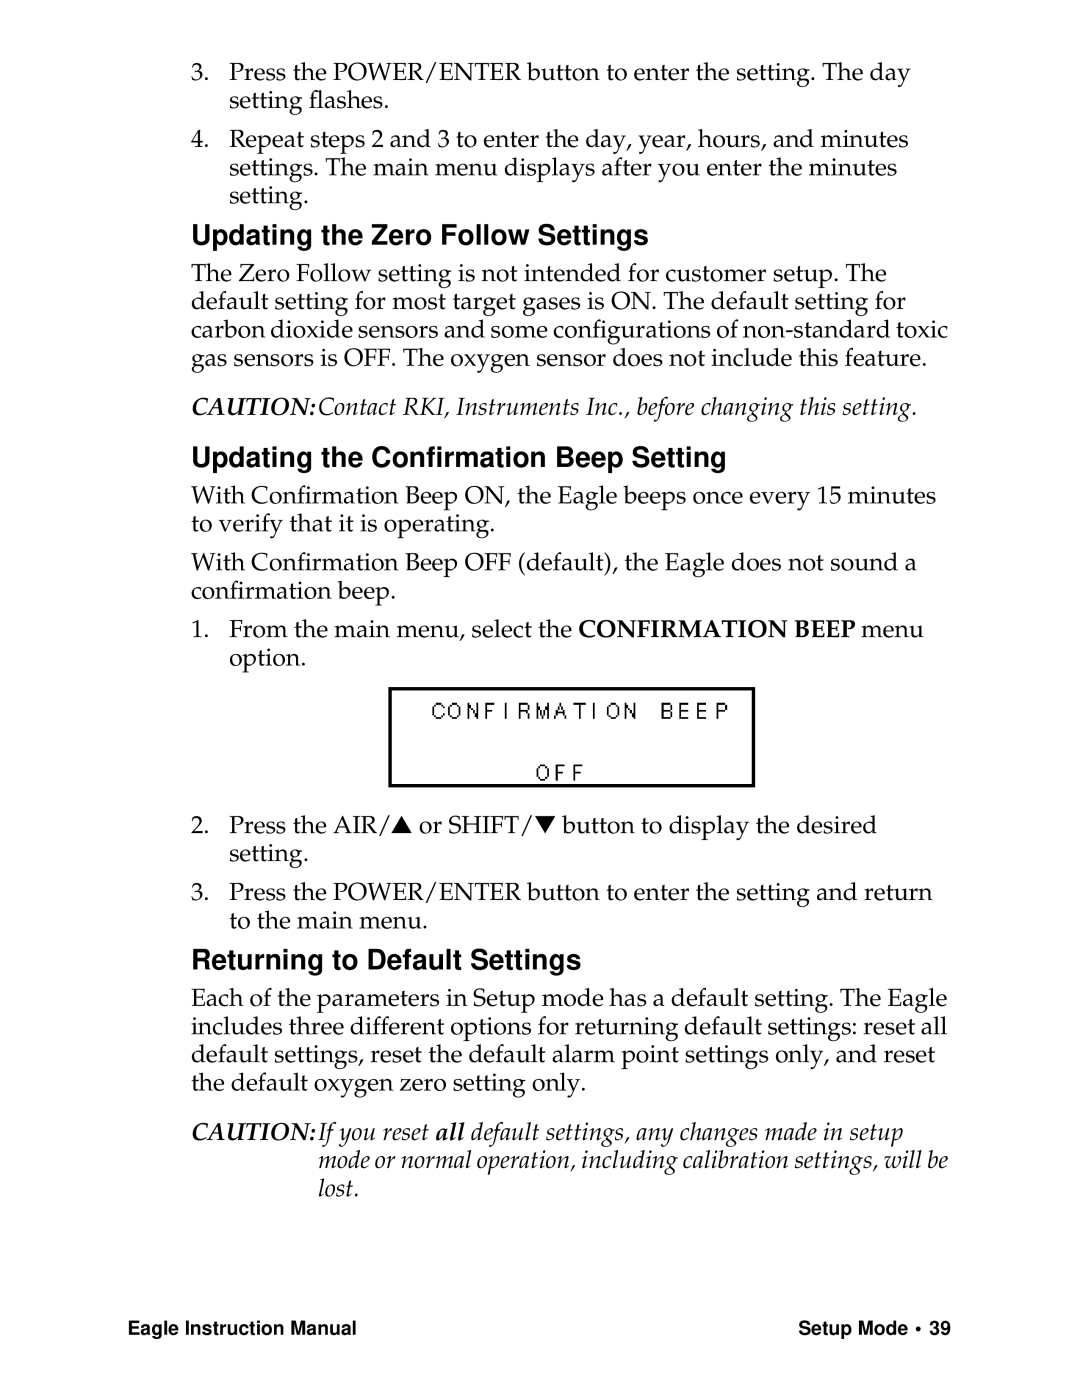 Eagle Home Products Eagle Series Updating the Zero Follow Settings, Updating the Conﬁrmation Beep Setting 